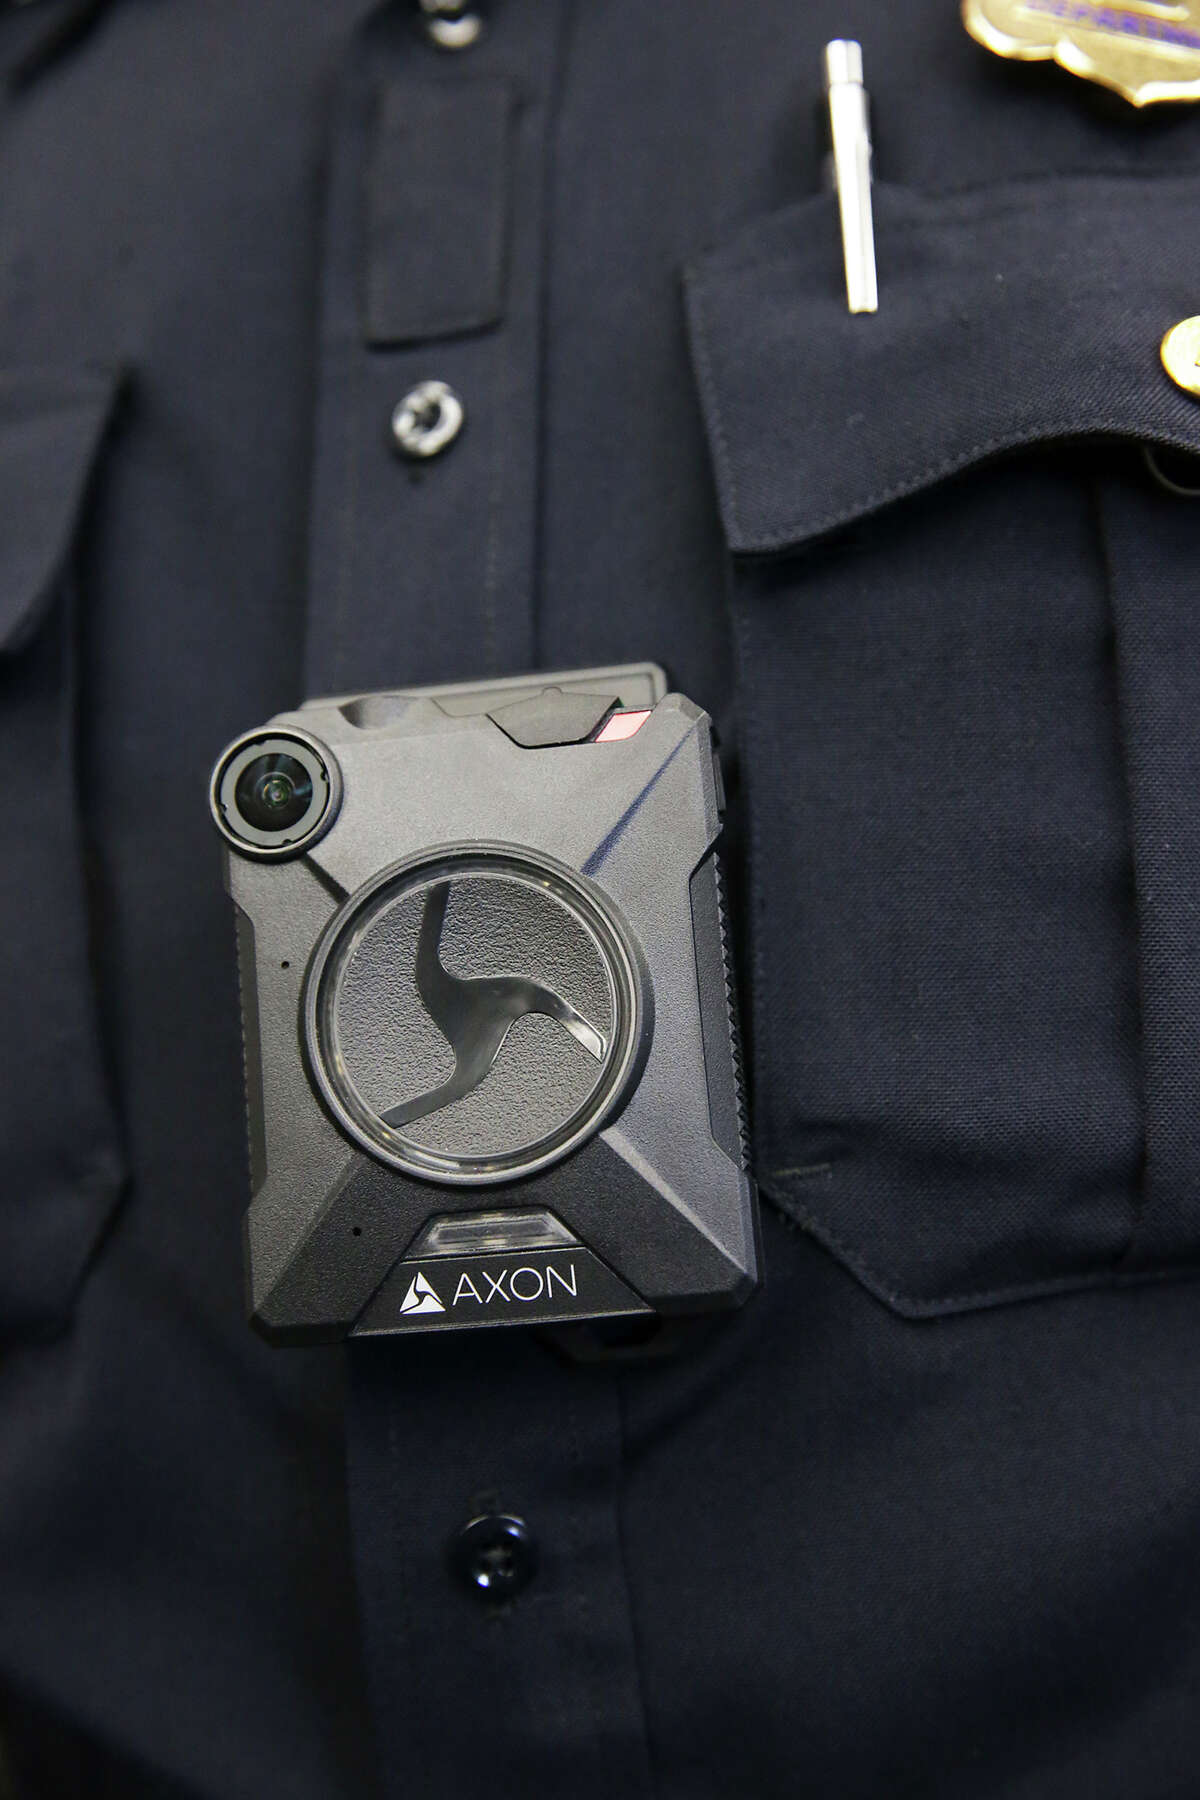 Sgt. Adam Zeldes displays the equipment as Chief William McManus and the SAPD reveal the new body camera to be worn by its officers during a demonstration session Wednesday morning at the Police Academy on February 17, 2016.